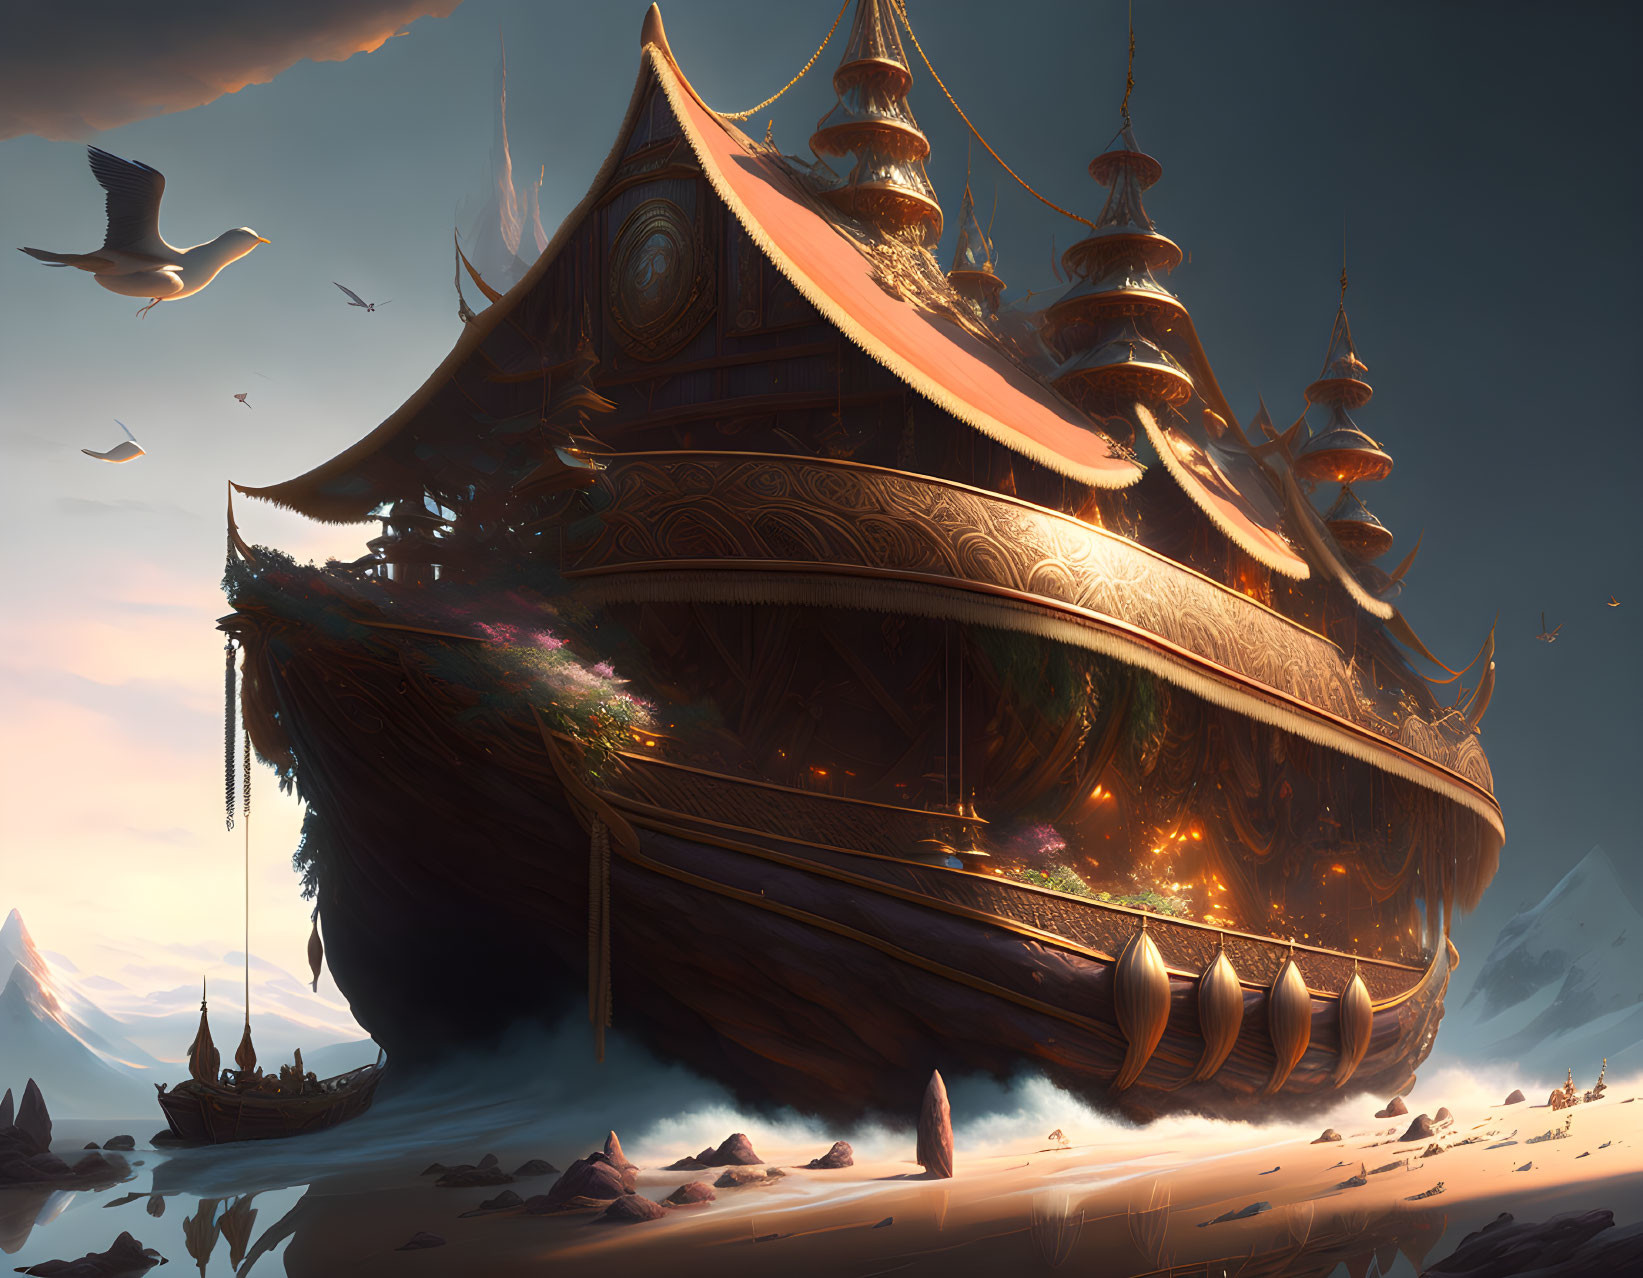 Ornate large ship with intricate designs beached at dusk